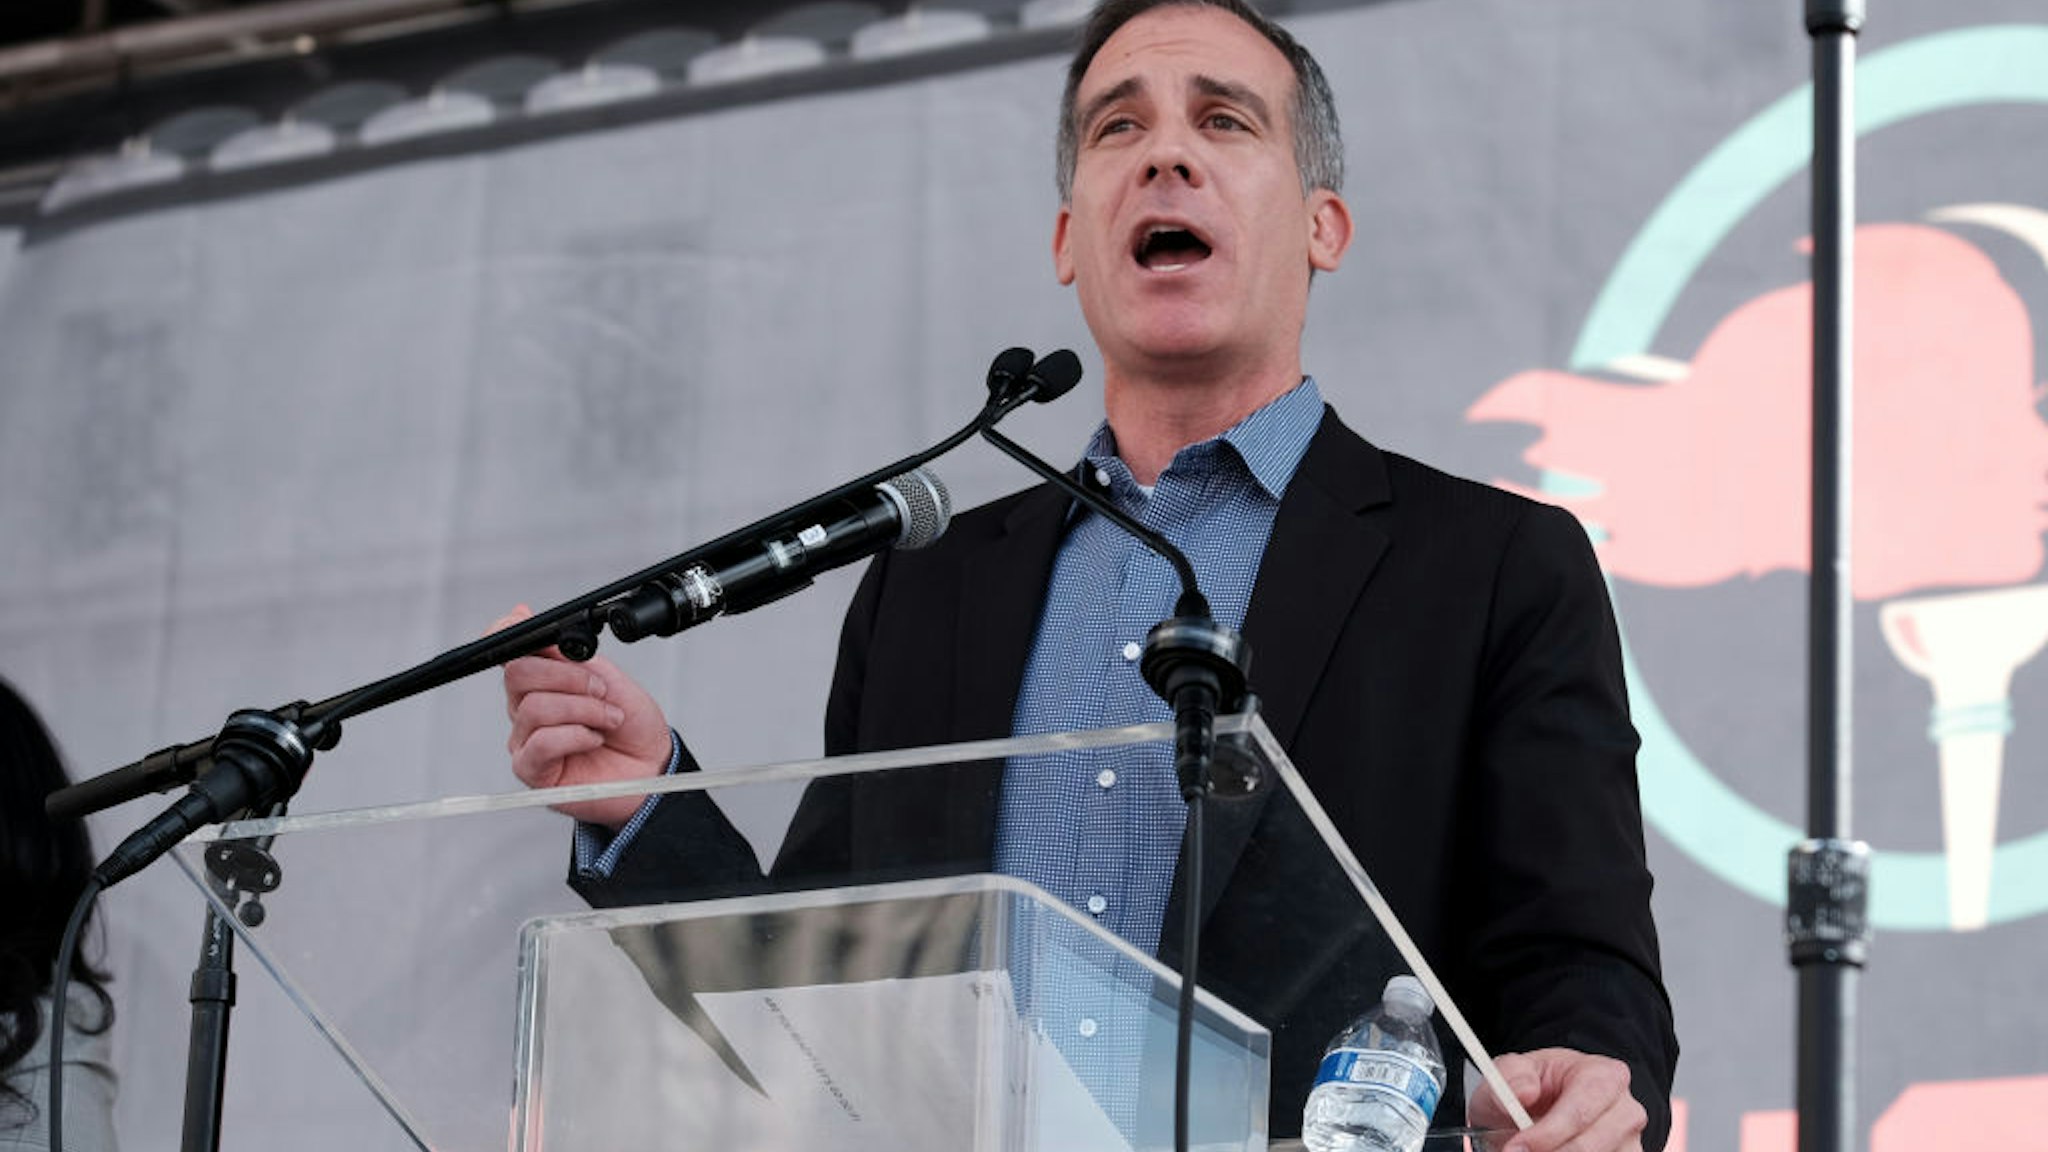 LOS ANGELES, CALIFORNIA - JANUARY 18: Los Angeles Mayor Eric Garcetti speaks at the 4th Annual Women's March LA: Women Rising at Pershing Square on January 18, 2020 in Los Angeles, California. (Photo by Sarah Morris/Getty Images)